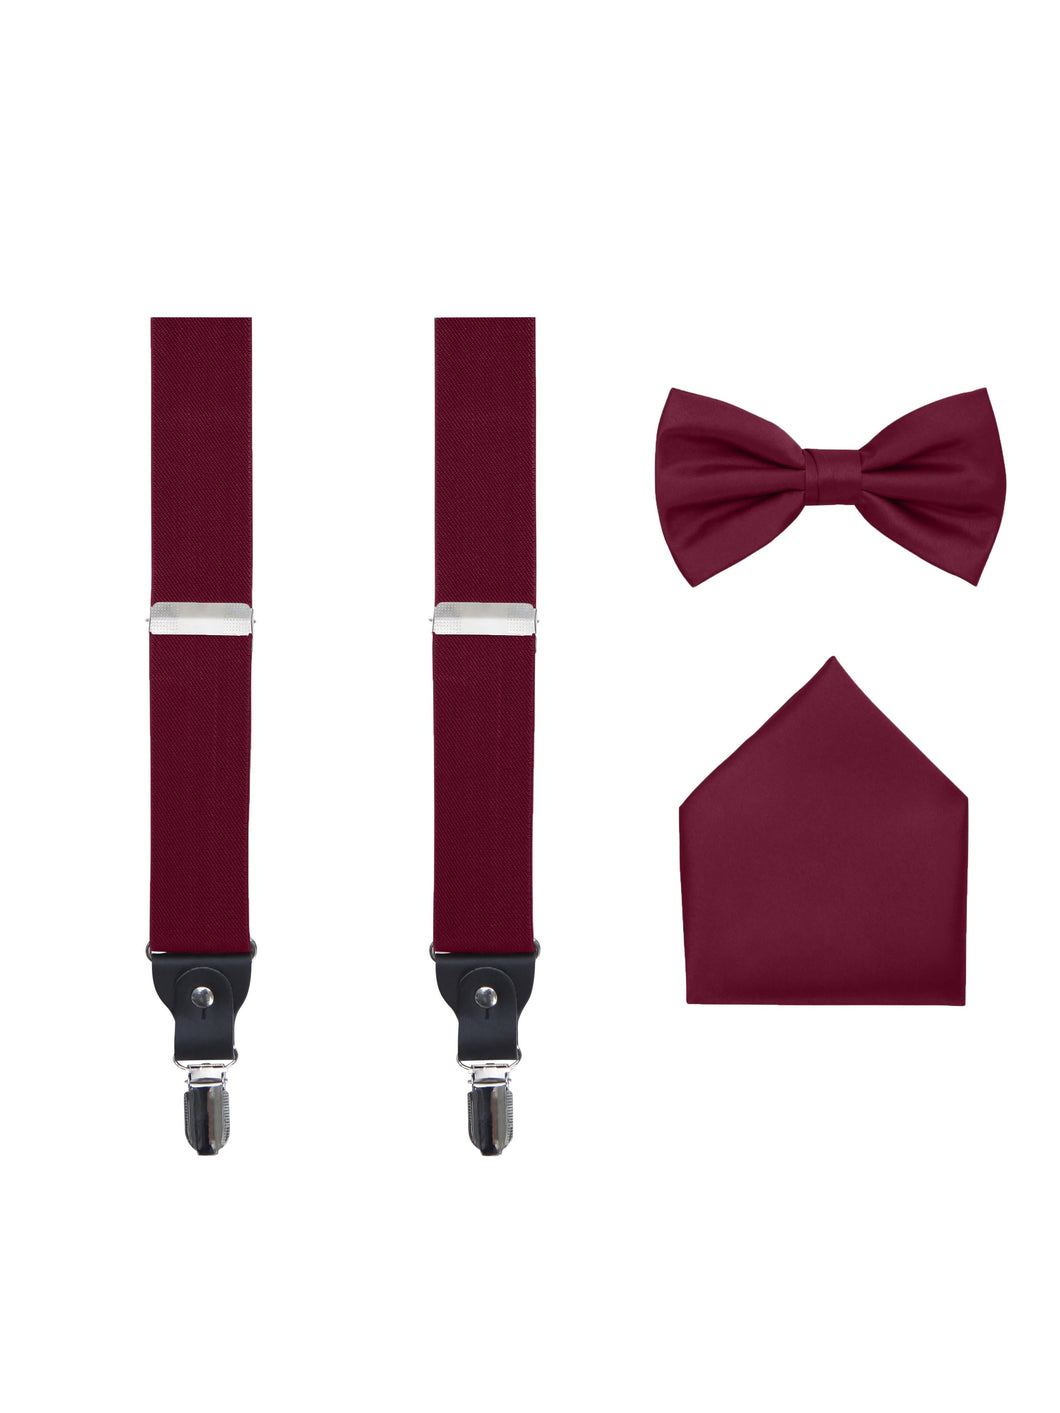 S.H. Churchill & Co. Men's 3 Piece Burgundy Suspender Set - Includes Suspenders, Matching Bow Tie, Pocket Hanky and Gift Box